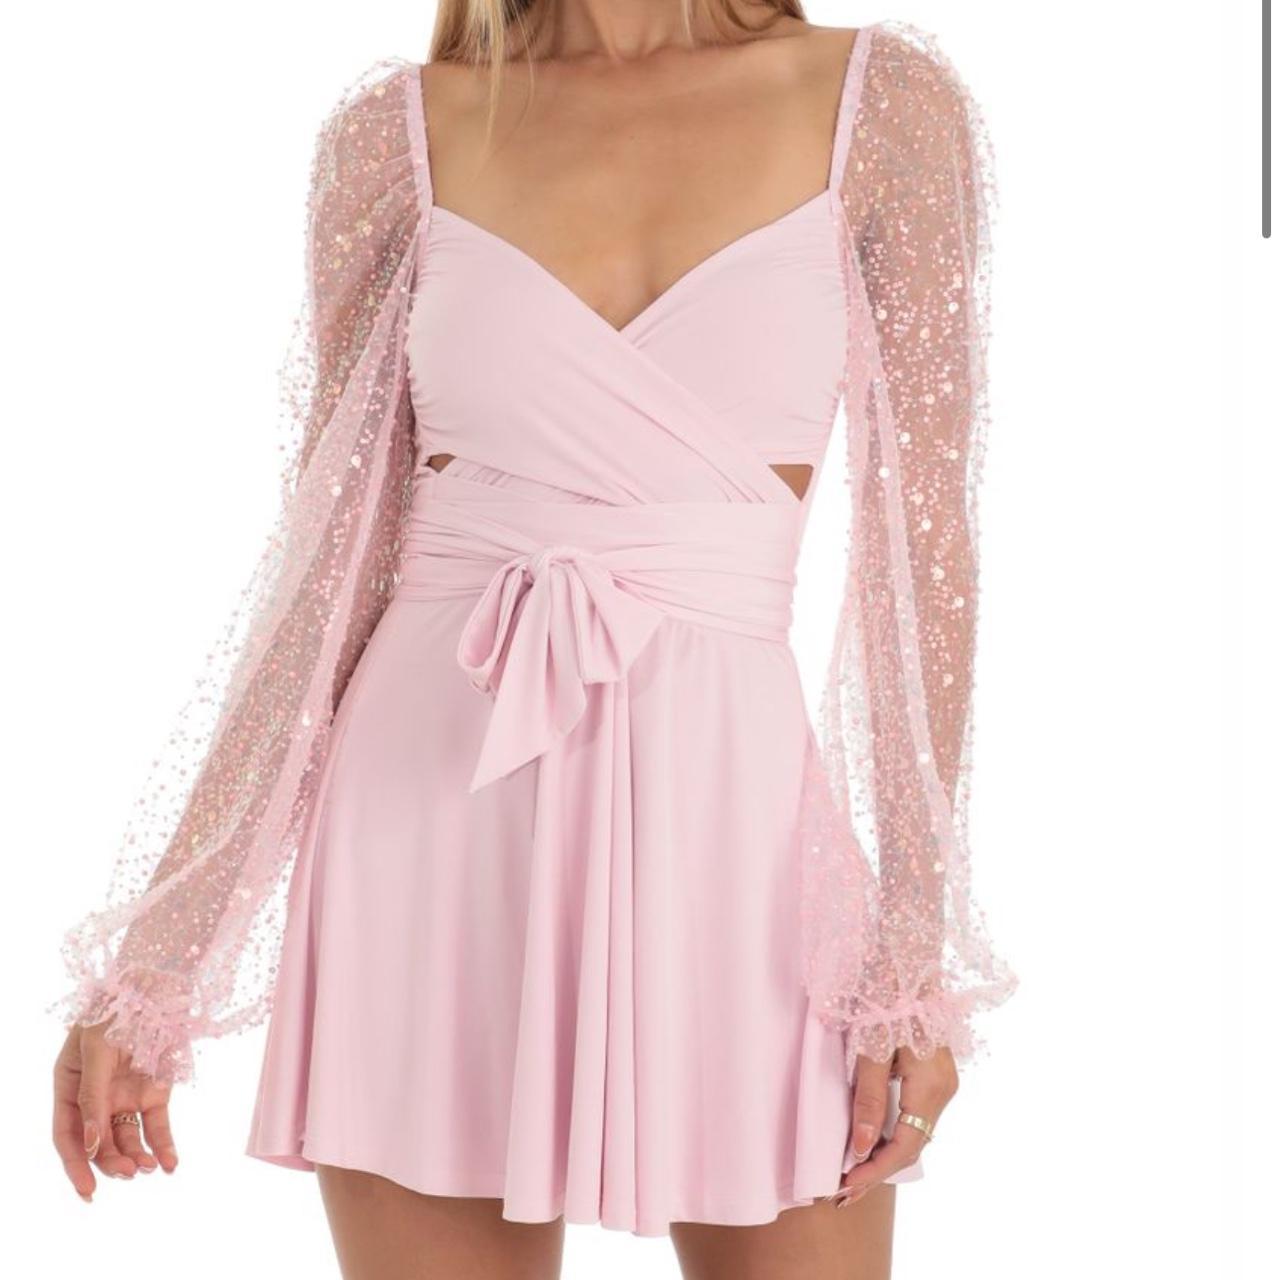 Lucy in the Sky Women's Pink Dress (2)